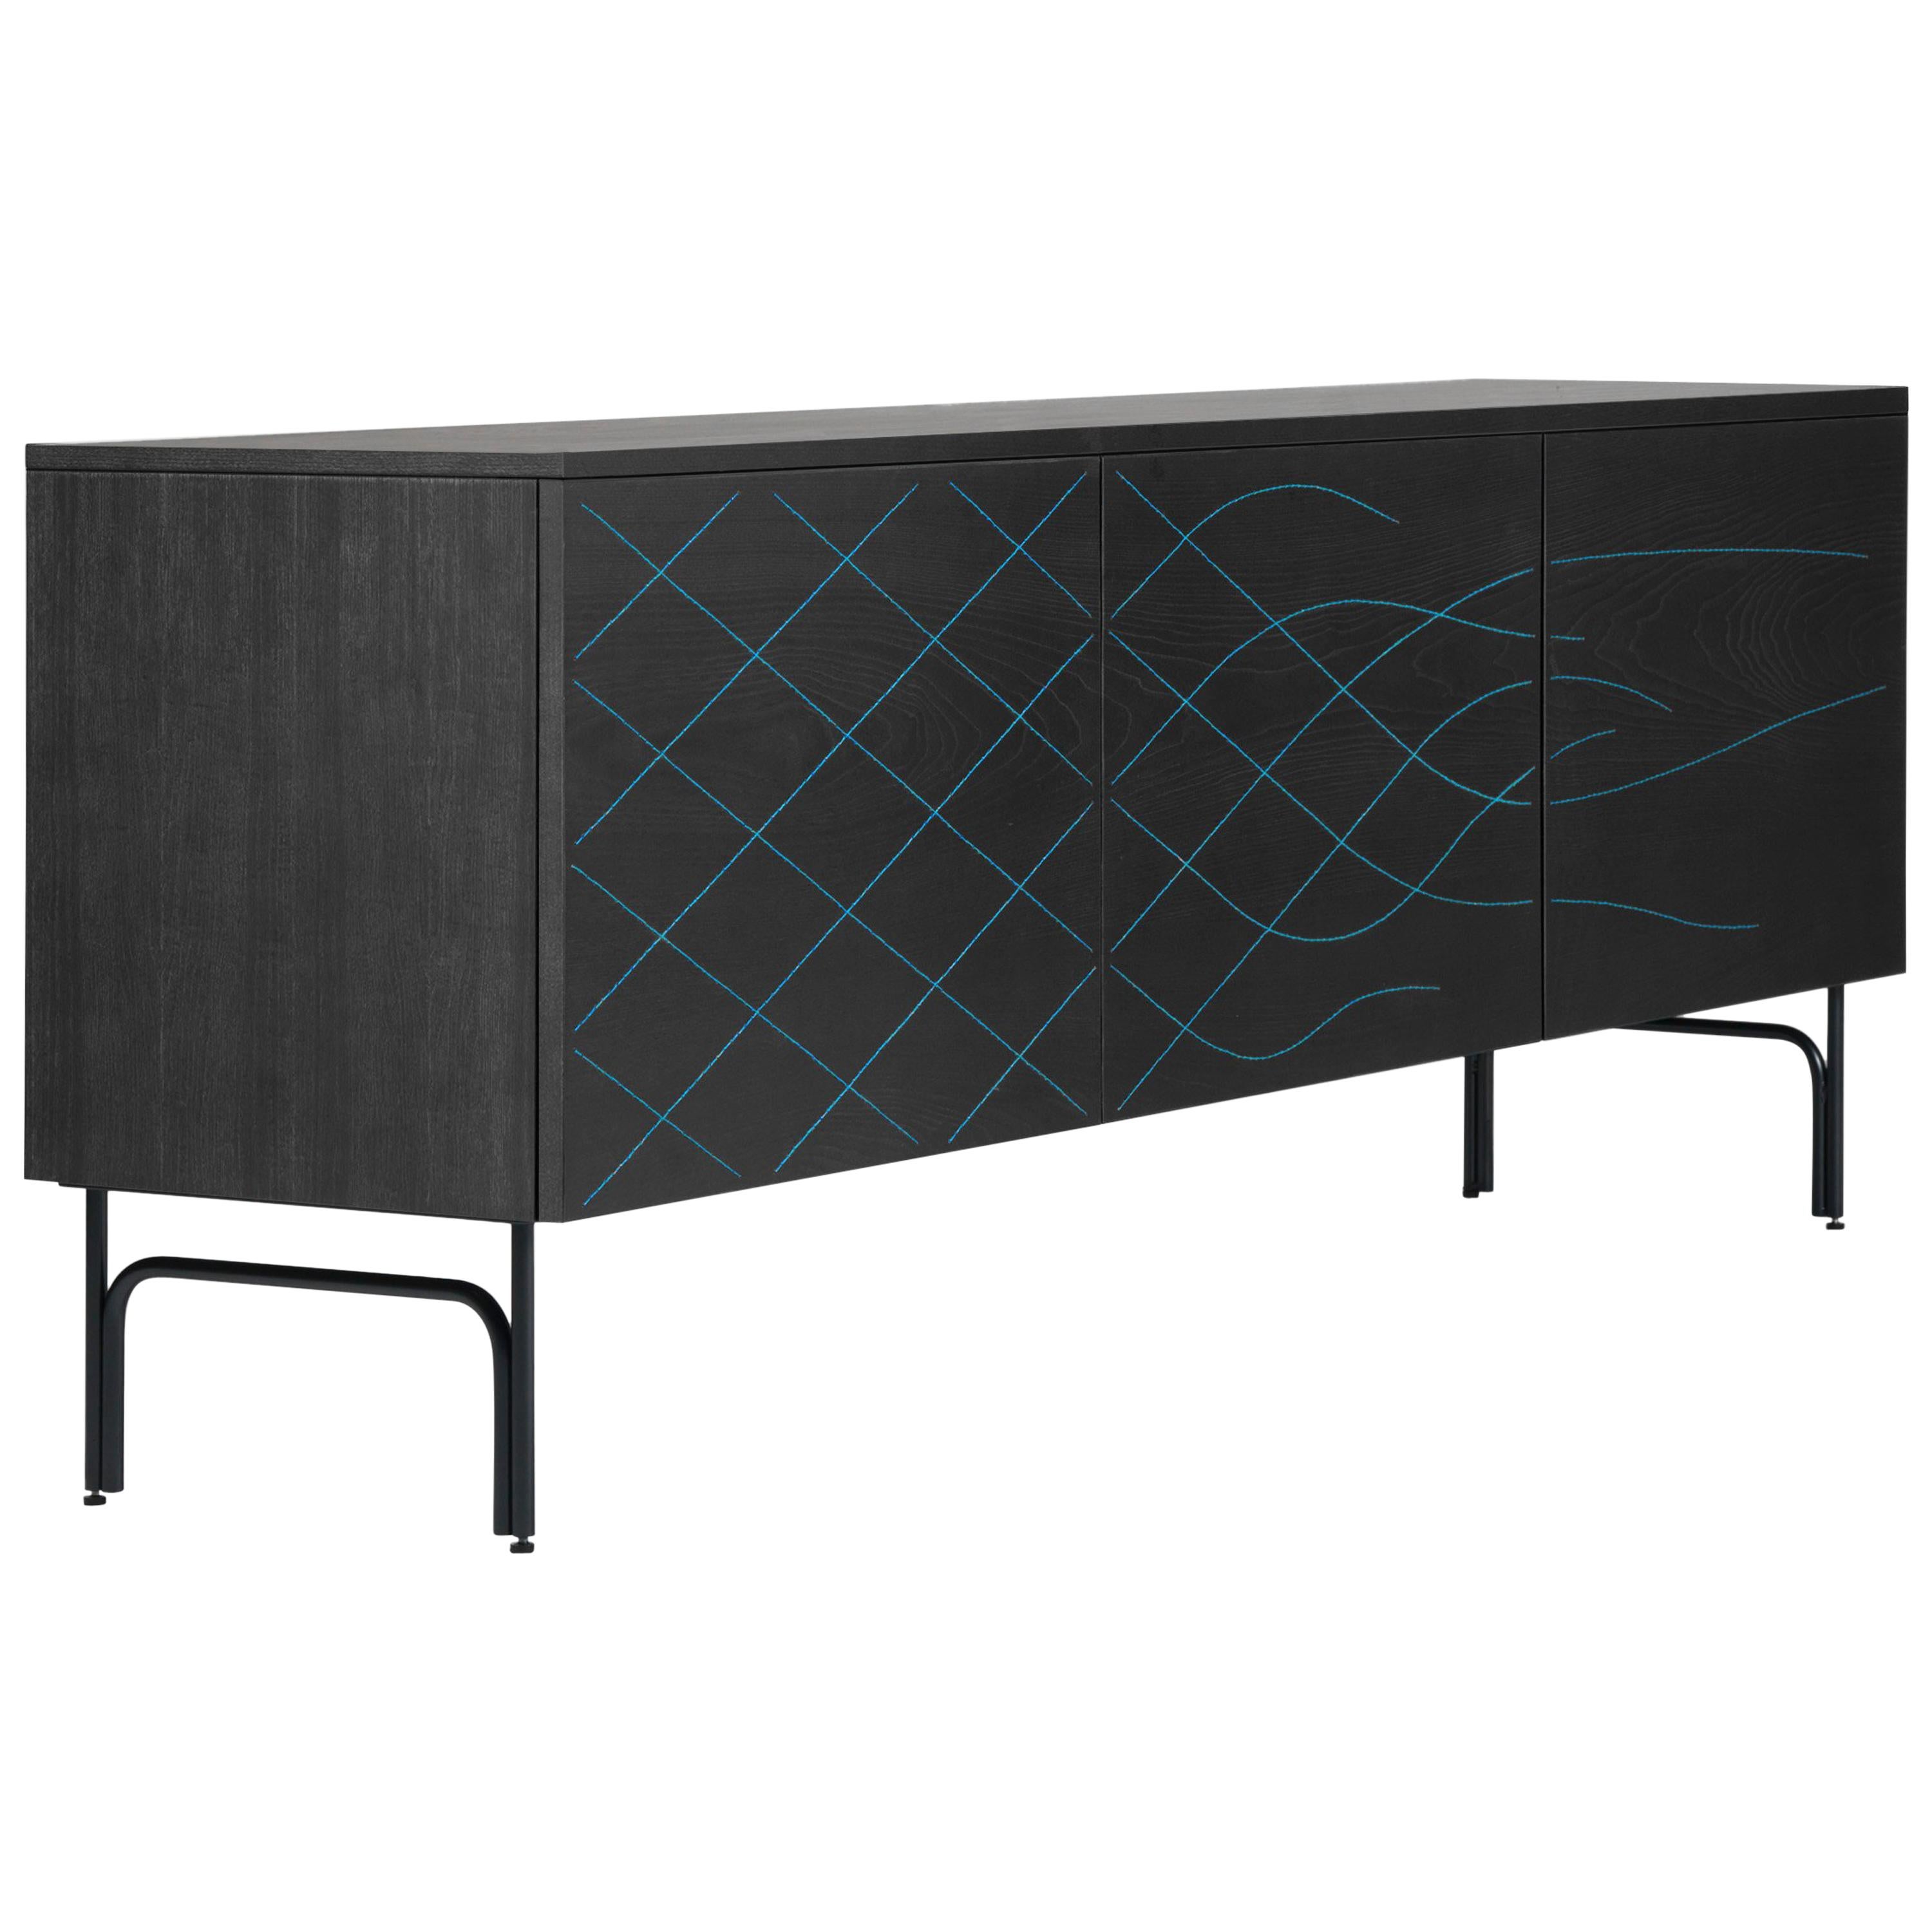 Cabinet designed by Färg & Blanche manufactured by BD Barcelona.

Manufactured in natural ash wood or stained in black. Structure in anodic black lacquered steel. The doors carry simple patterns made using the Wood TailoringTM technique. Blue